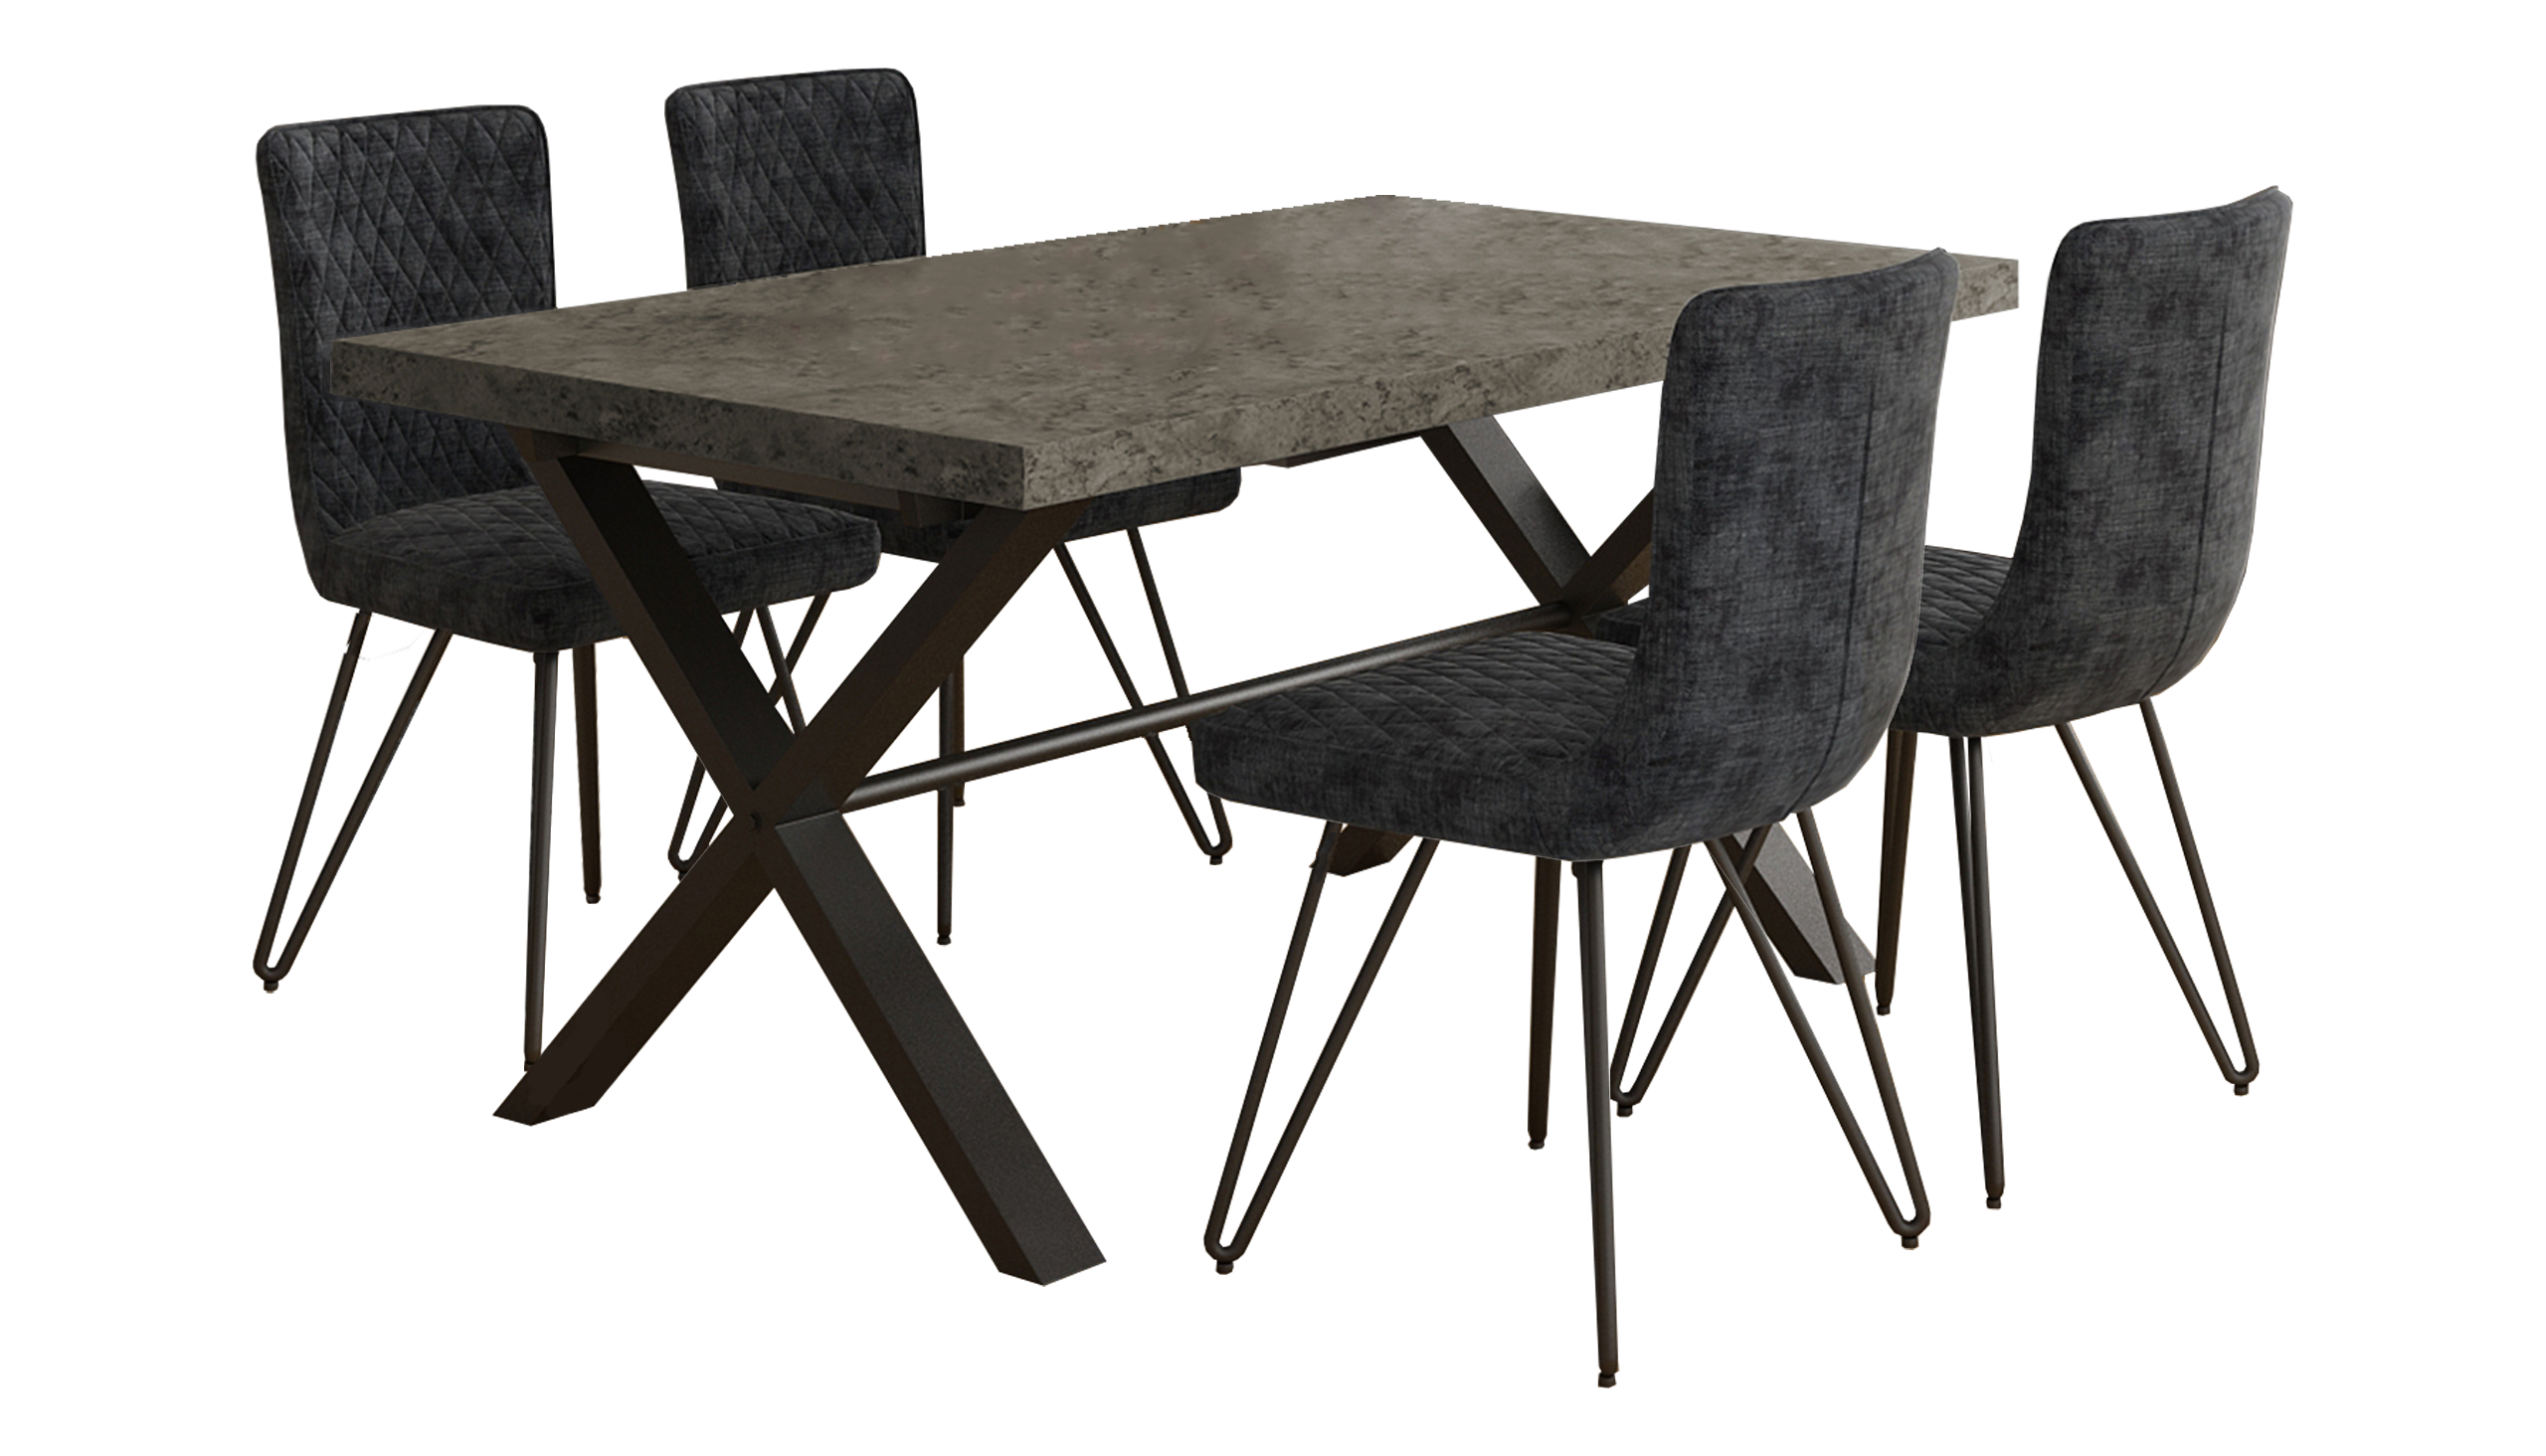 Brooklyn Concrete Effect Large Dining Table with 4 Chairs - AHF Furniture & Carpets